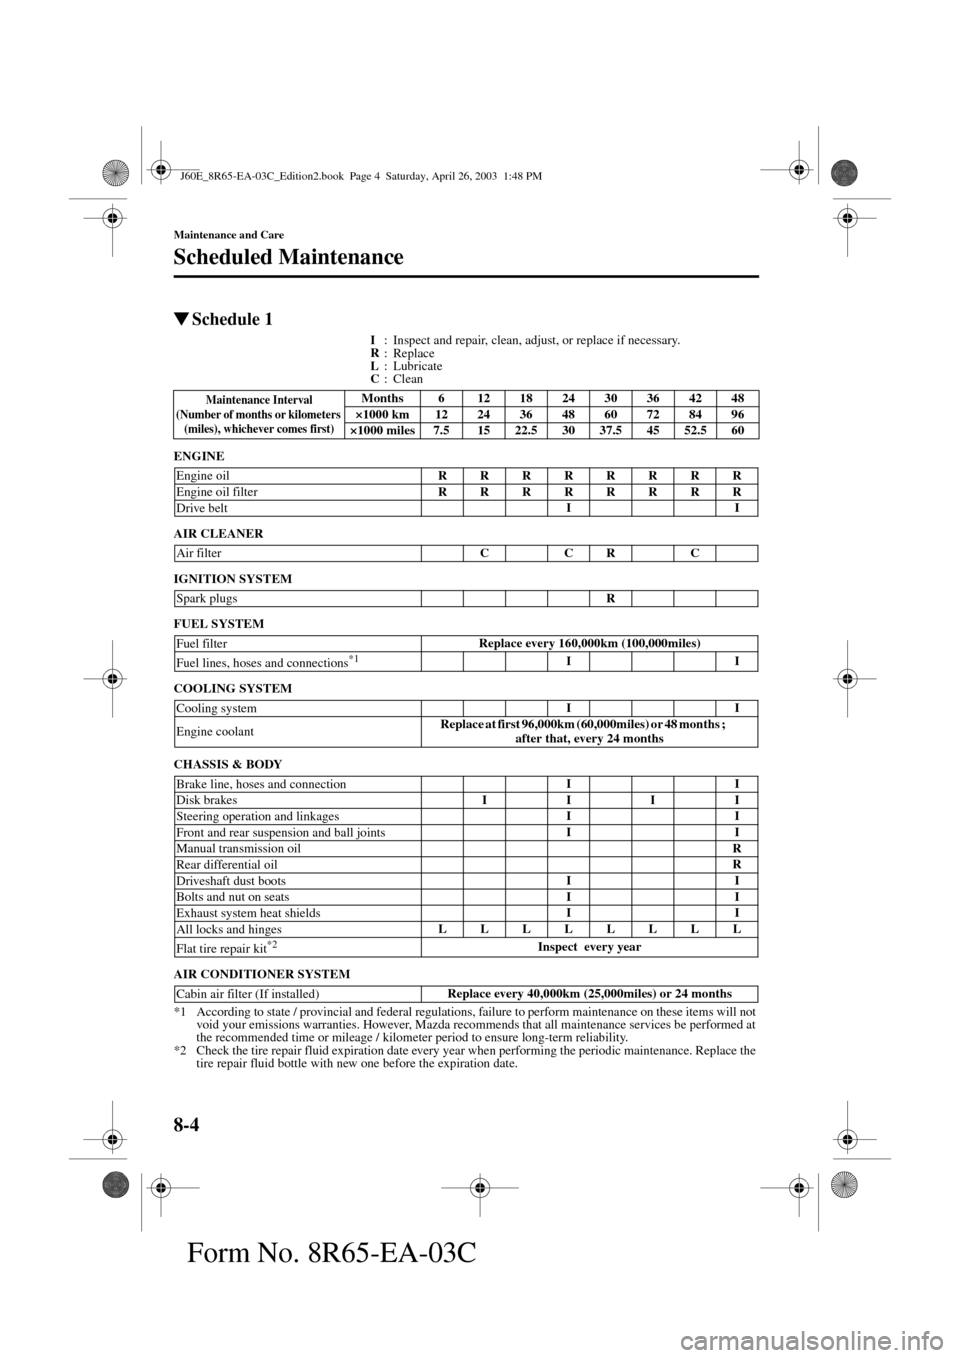 MAZDA MODEL RX 8 2004  Owners Manual (in English) 8-4
Maintenance and Care
Scheduled Maintenance
Form No. 8R65-EA-03C
Schedule 1
I
: Inspect and repair, clean, adjust, or replace if necessary.
R
: Replace 
L
: Lubricate
C
:Clean
ENGINE
AIR CLEANER
I